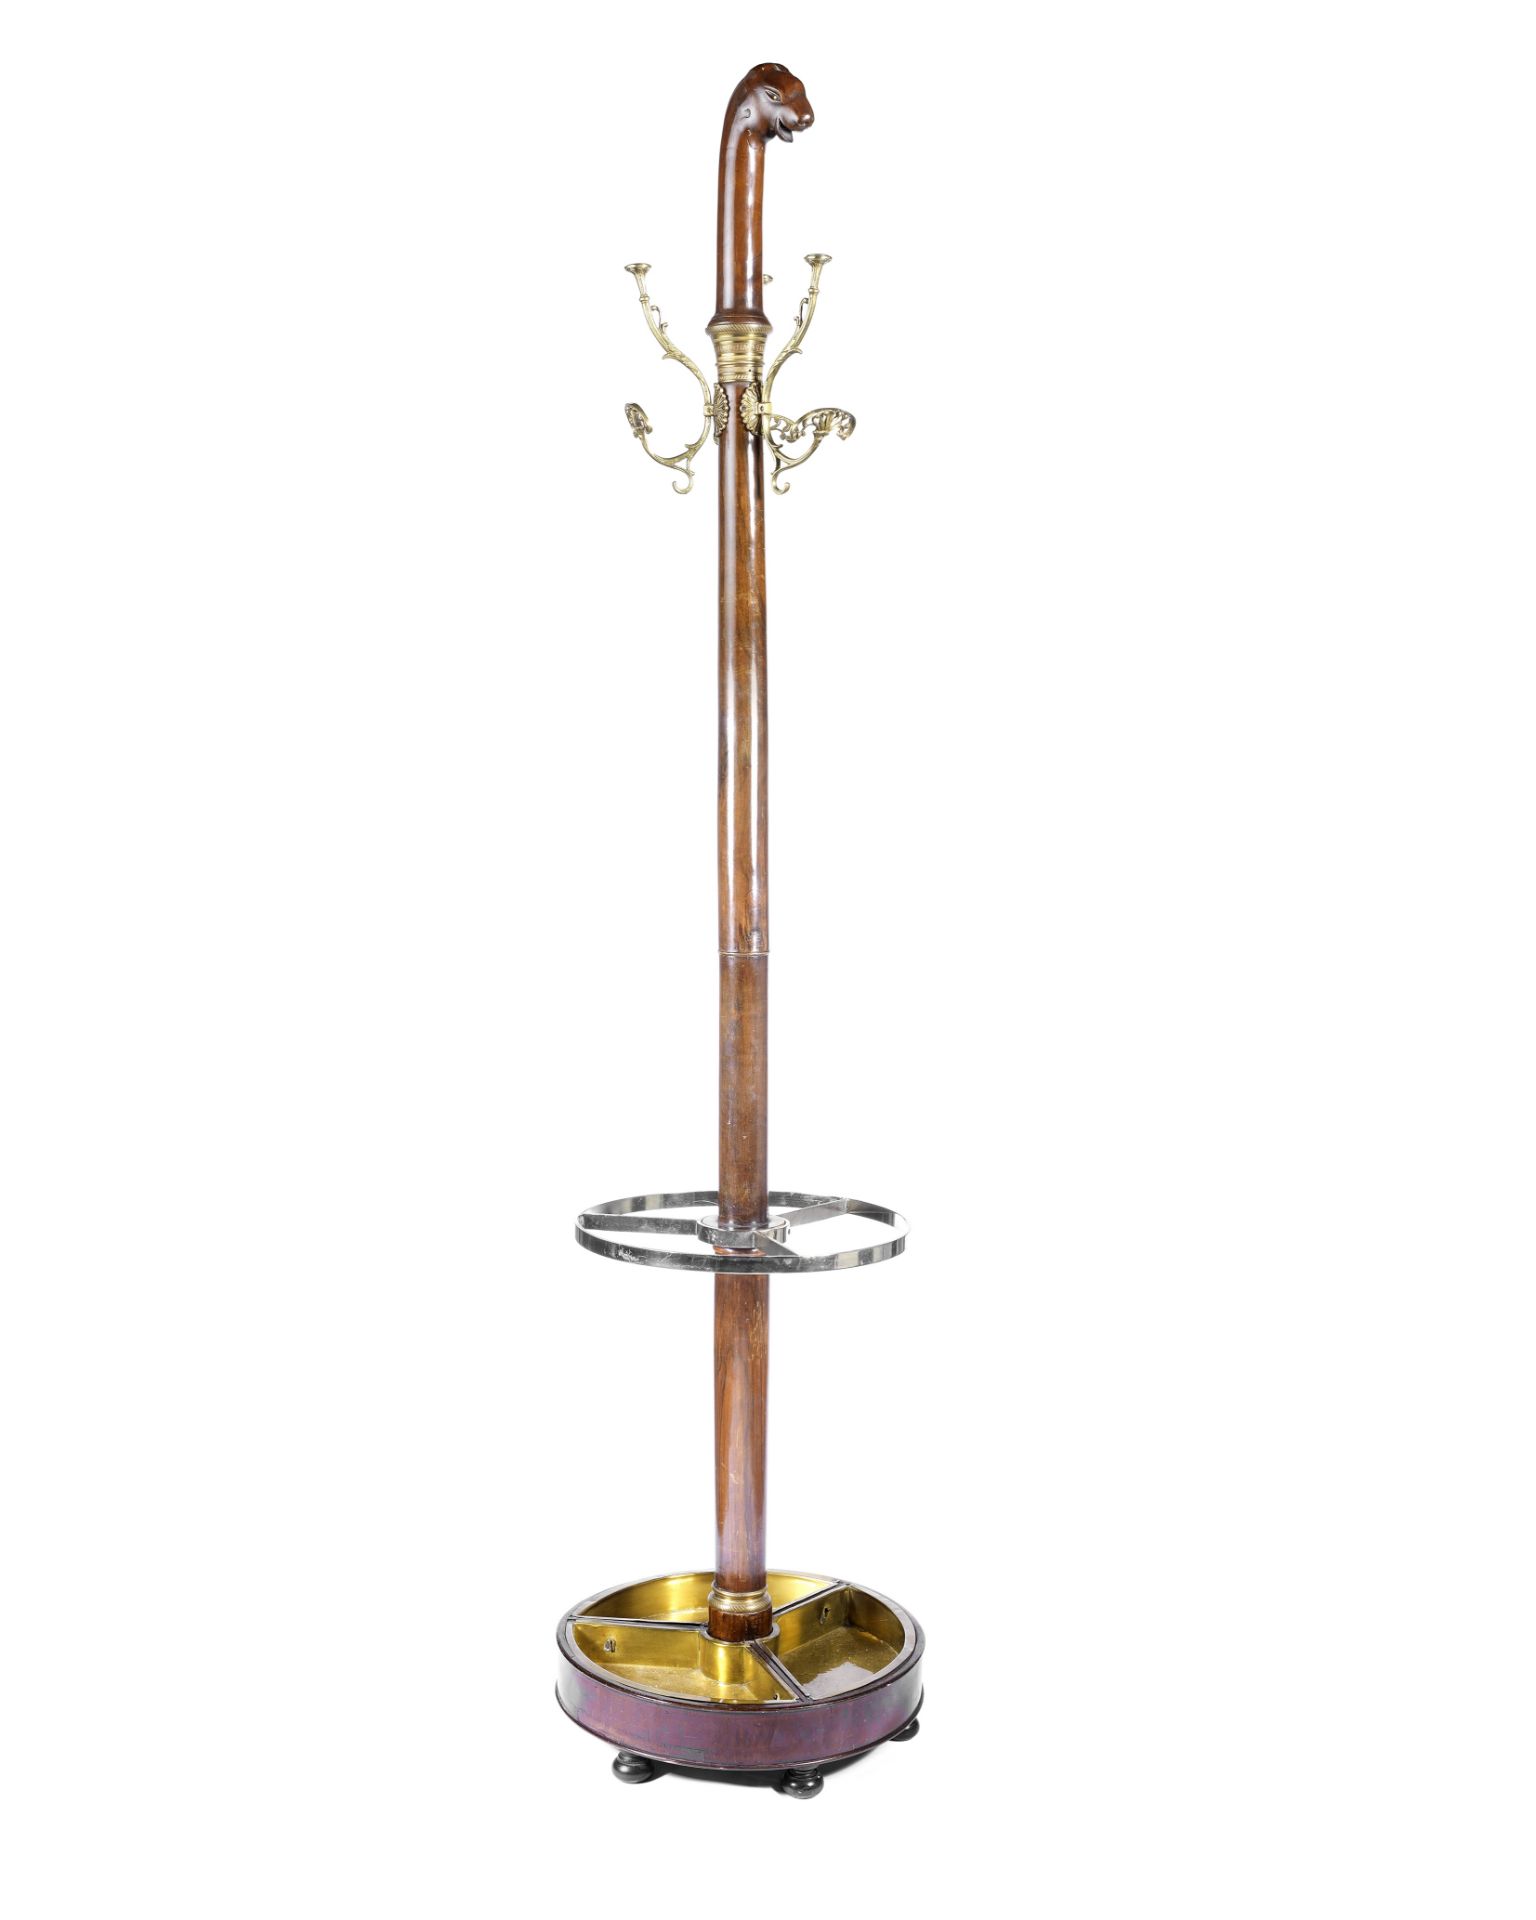 A late 19th century / early 20th century Empire revival mahogany and gilt brass hat stand